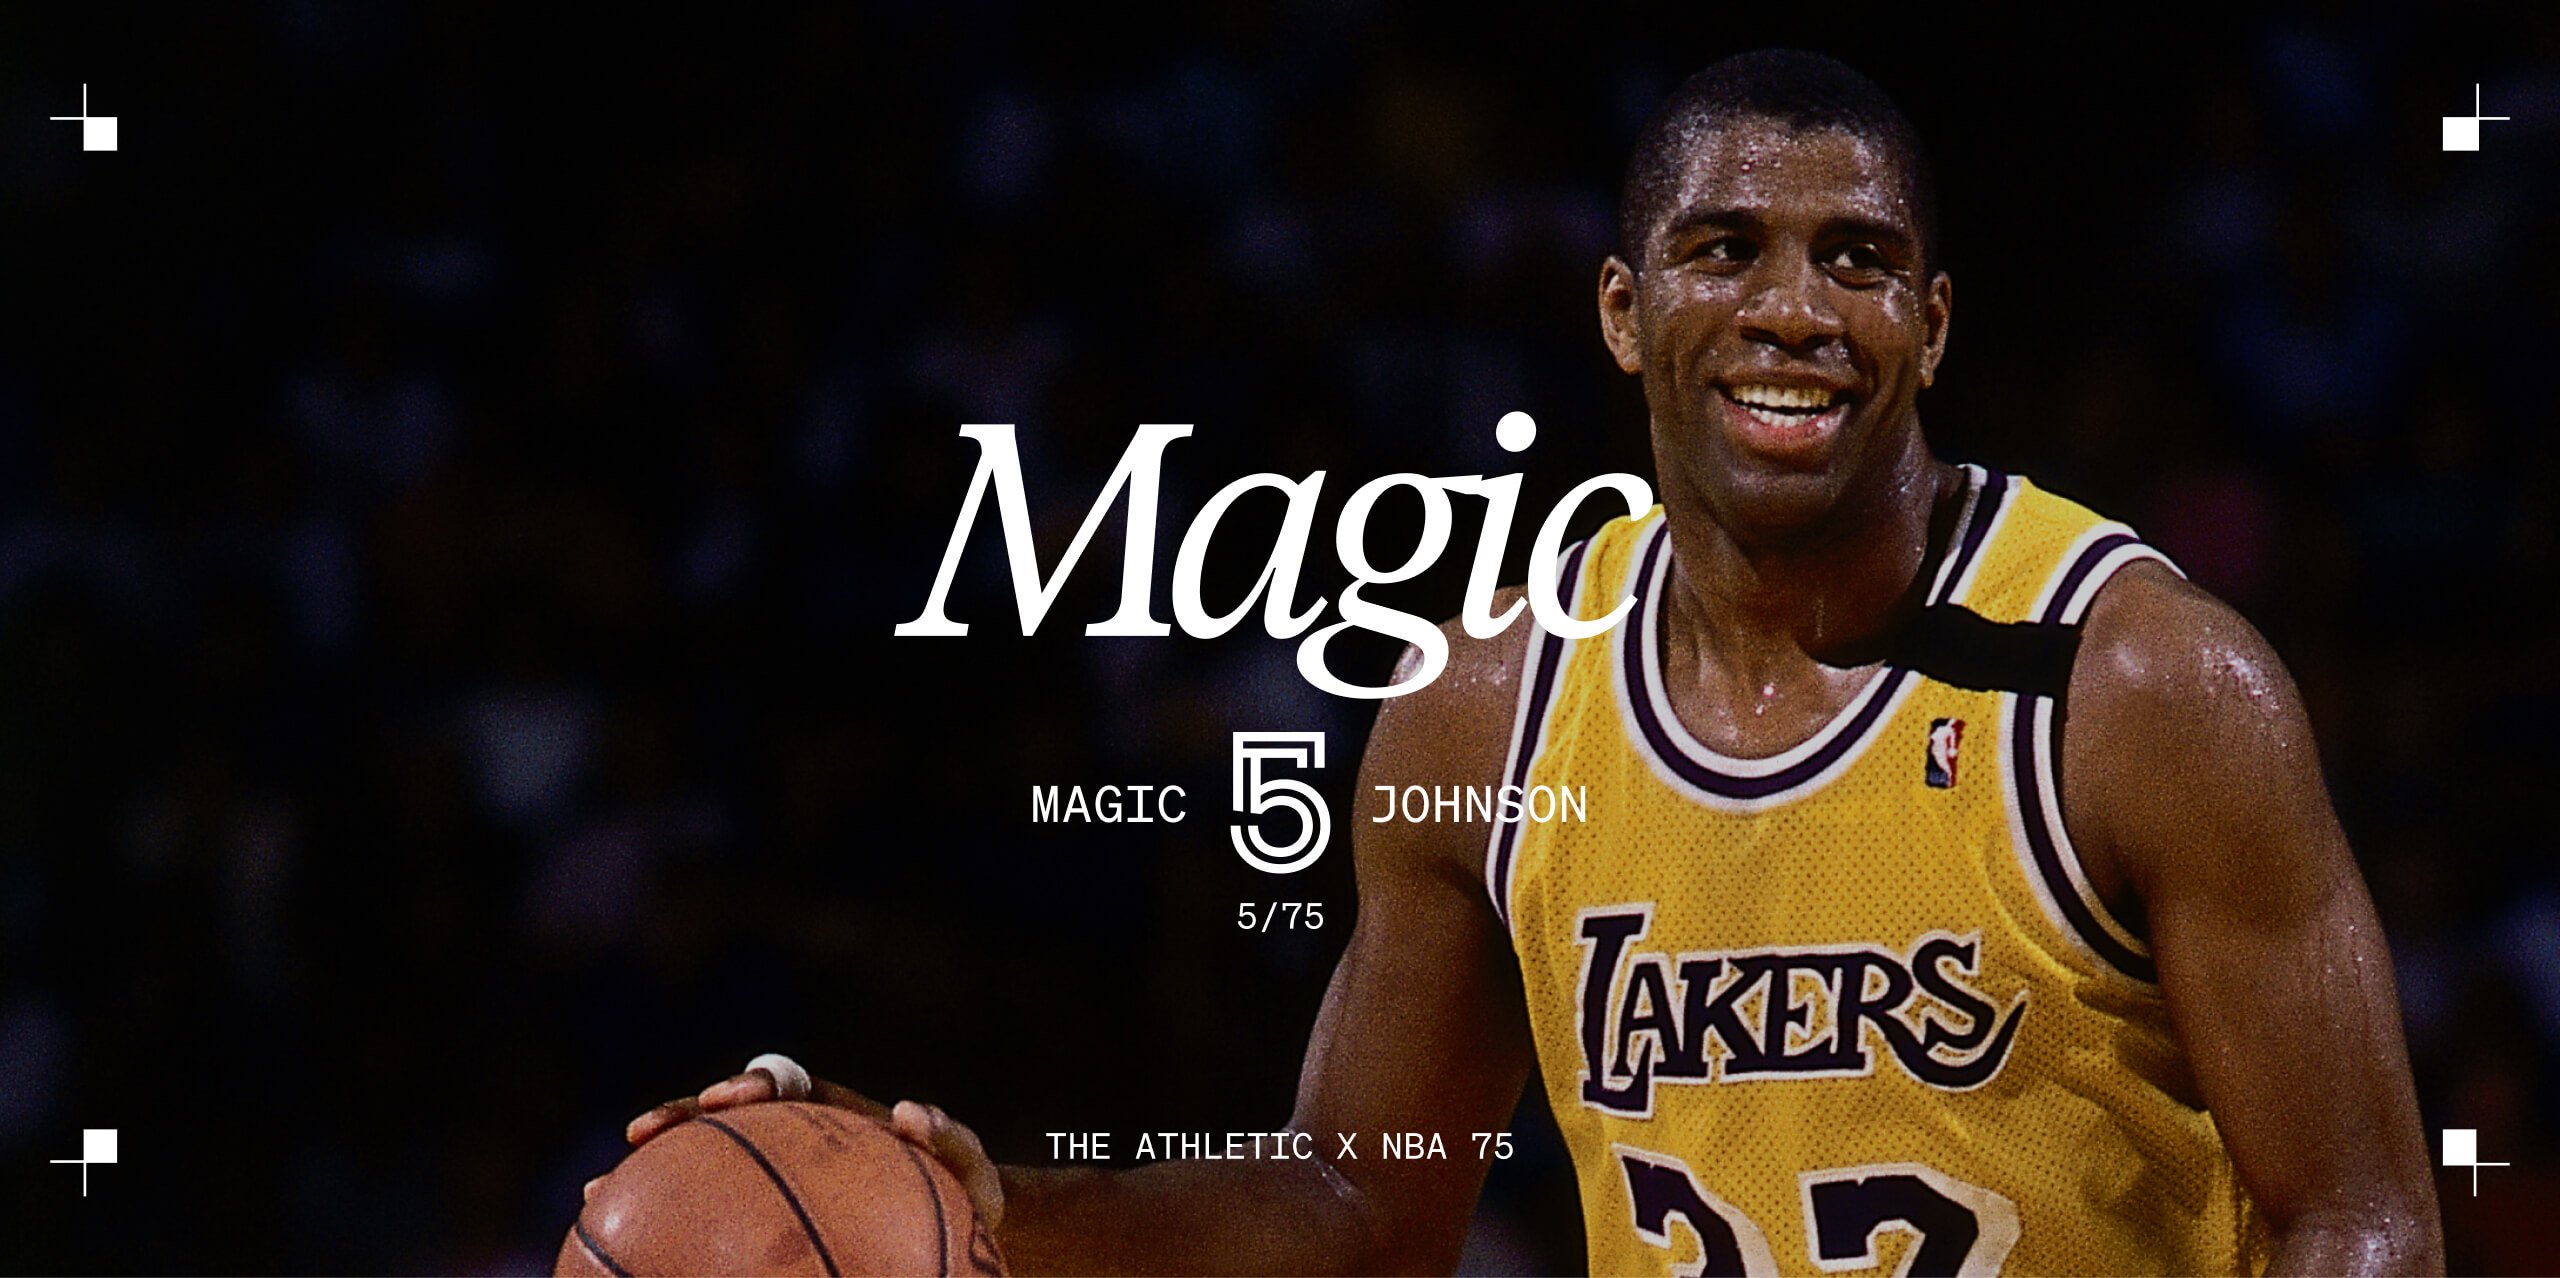 Magic Johnson was part of the 'Dream Team' that won the gold medal at the 1992 Olympics. Where were the Olympics held?